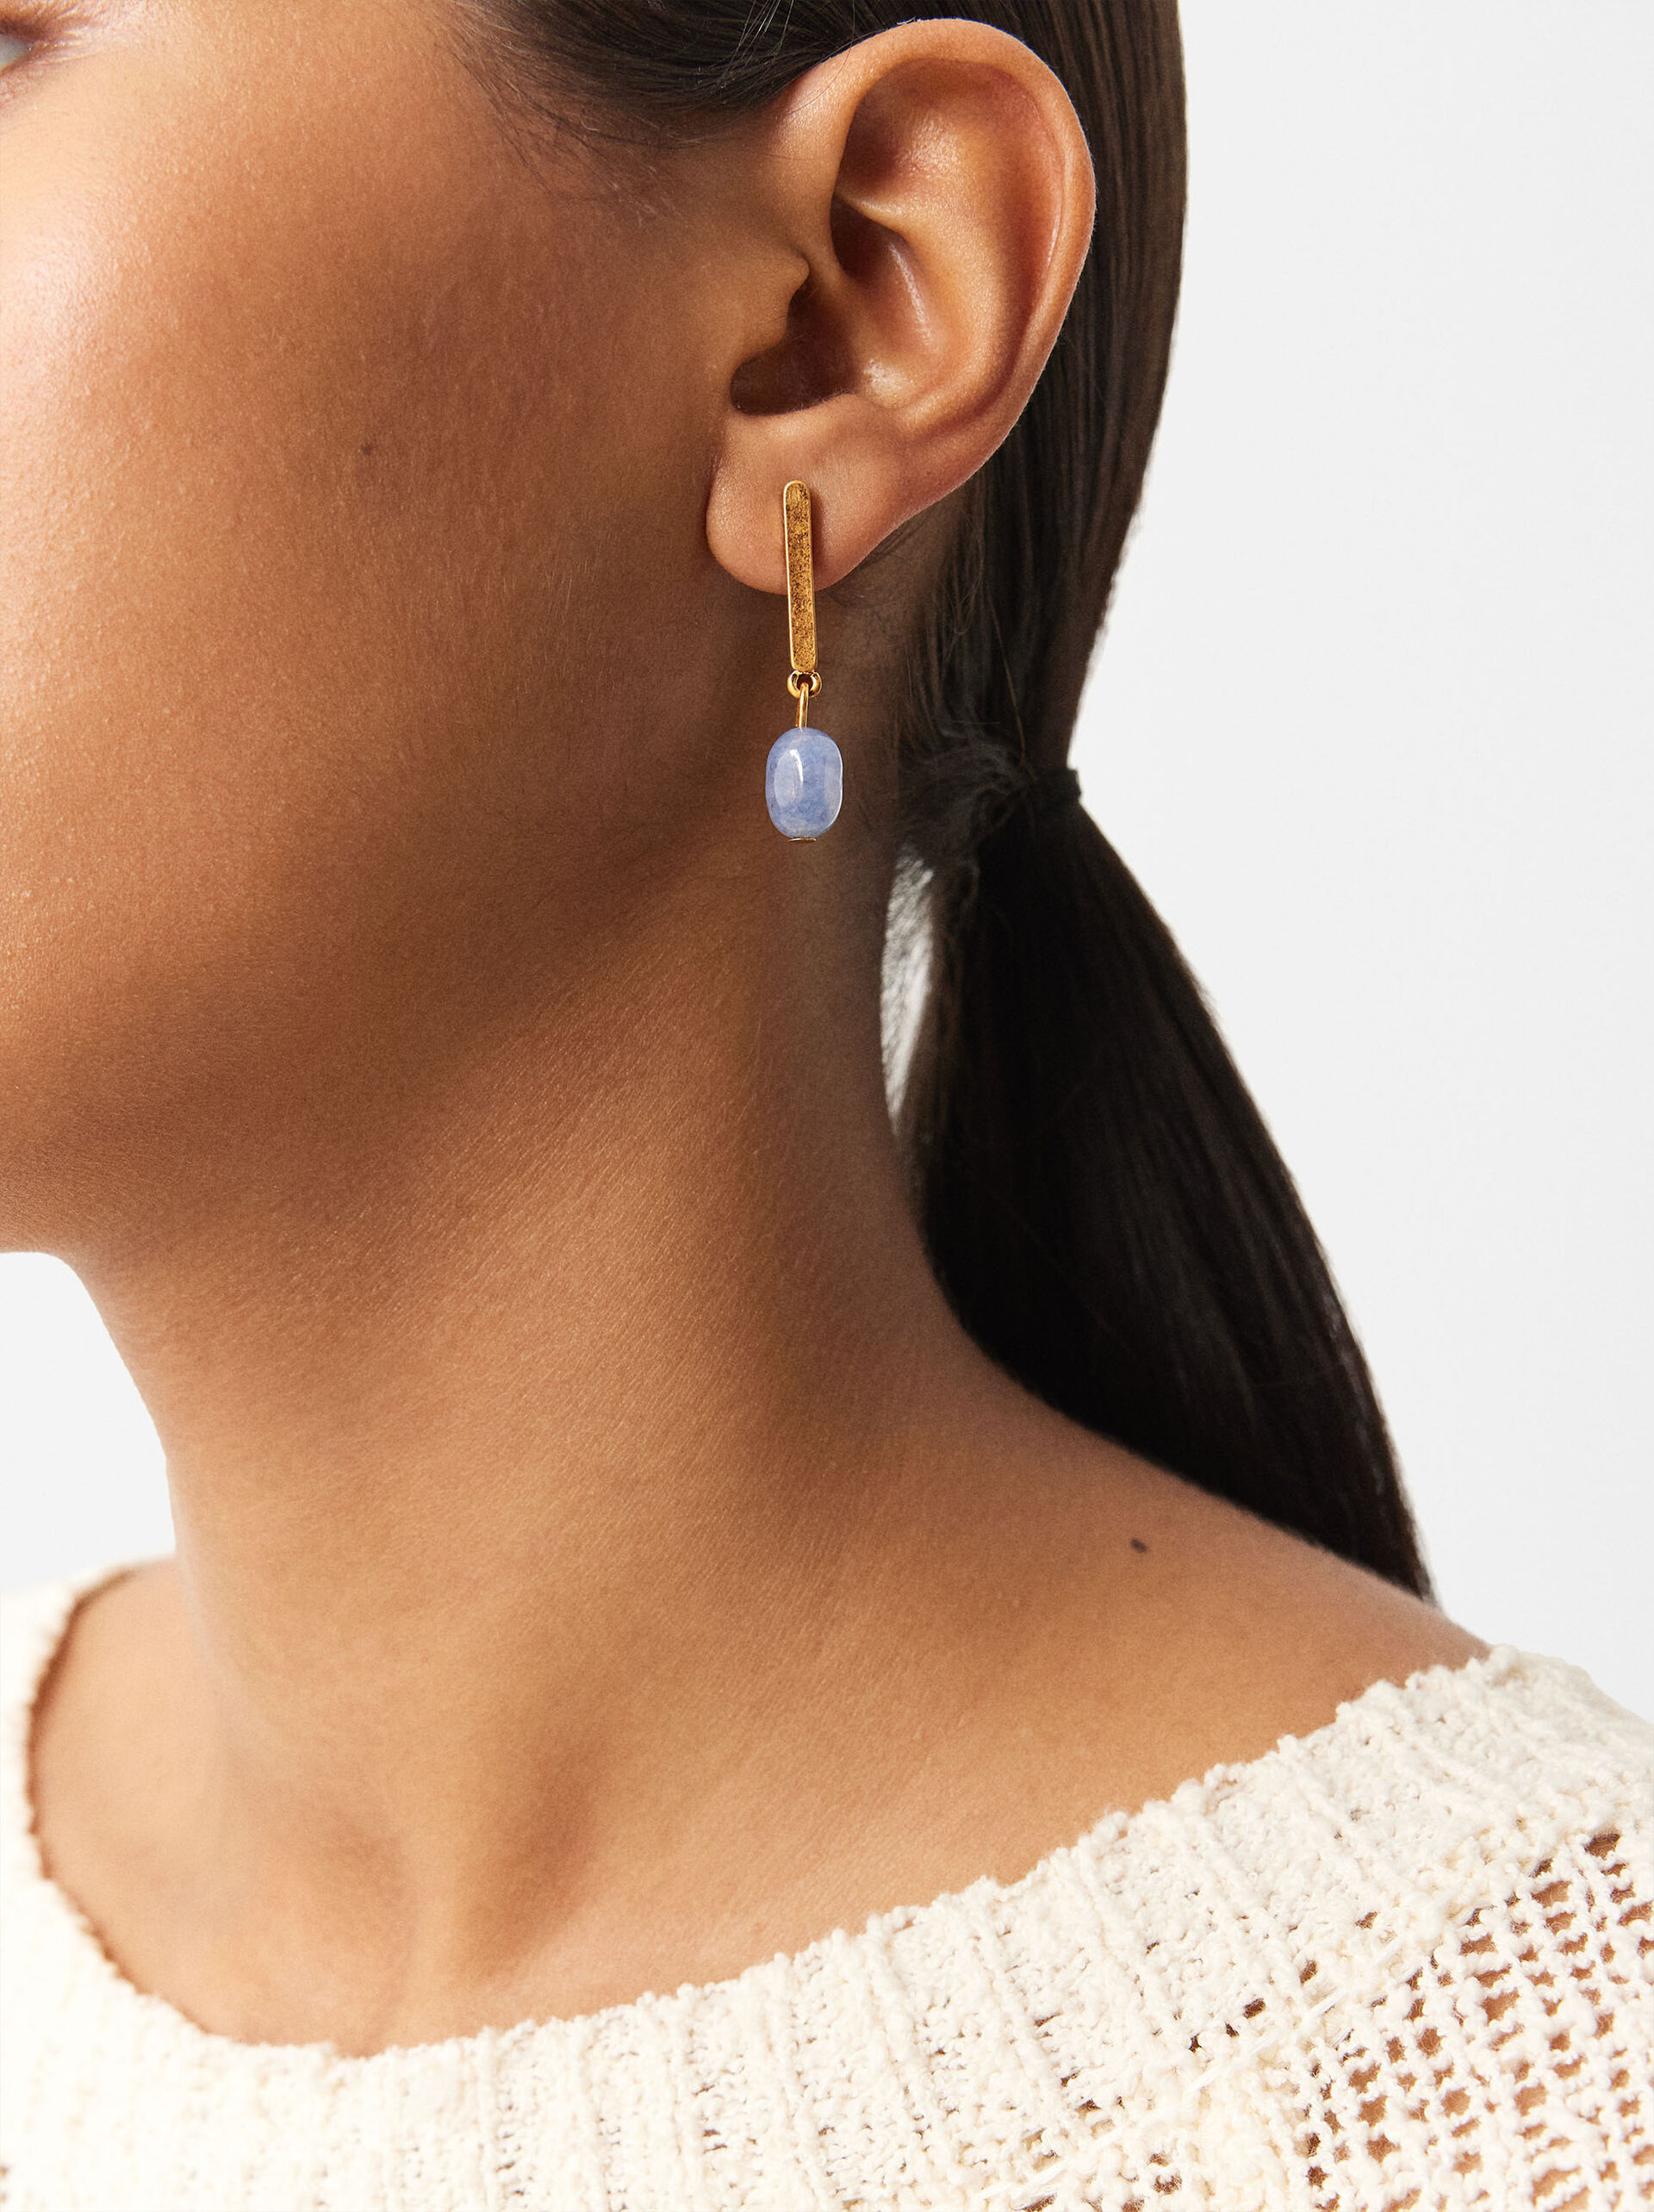 Gold-Toned Earrings With Stone image number 1.0